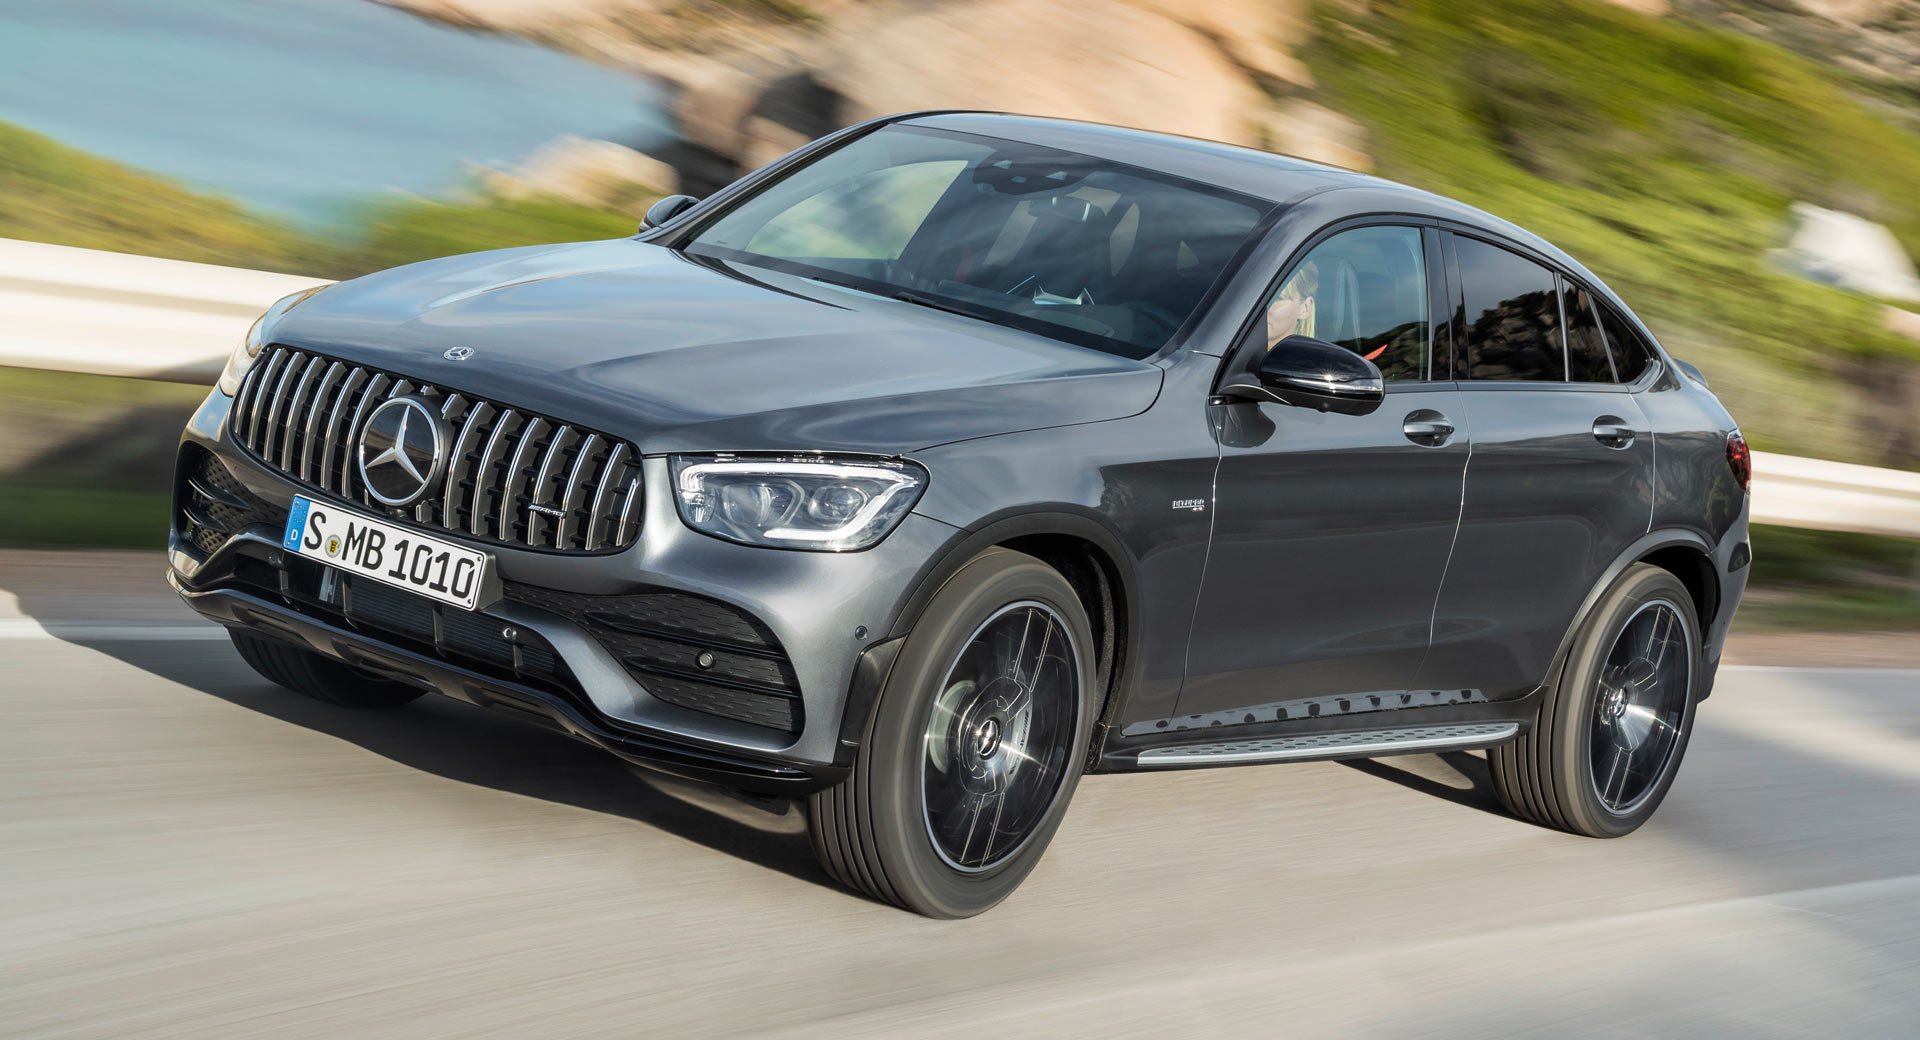 2020 Mercedes-AMG GLC 43 4Matic Launches With 385 HP | Carscoops